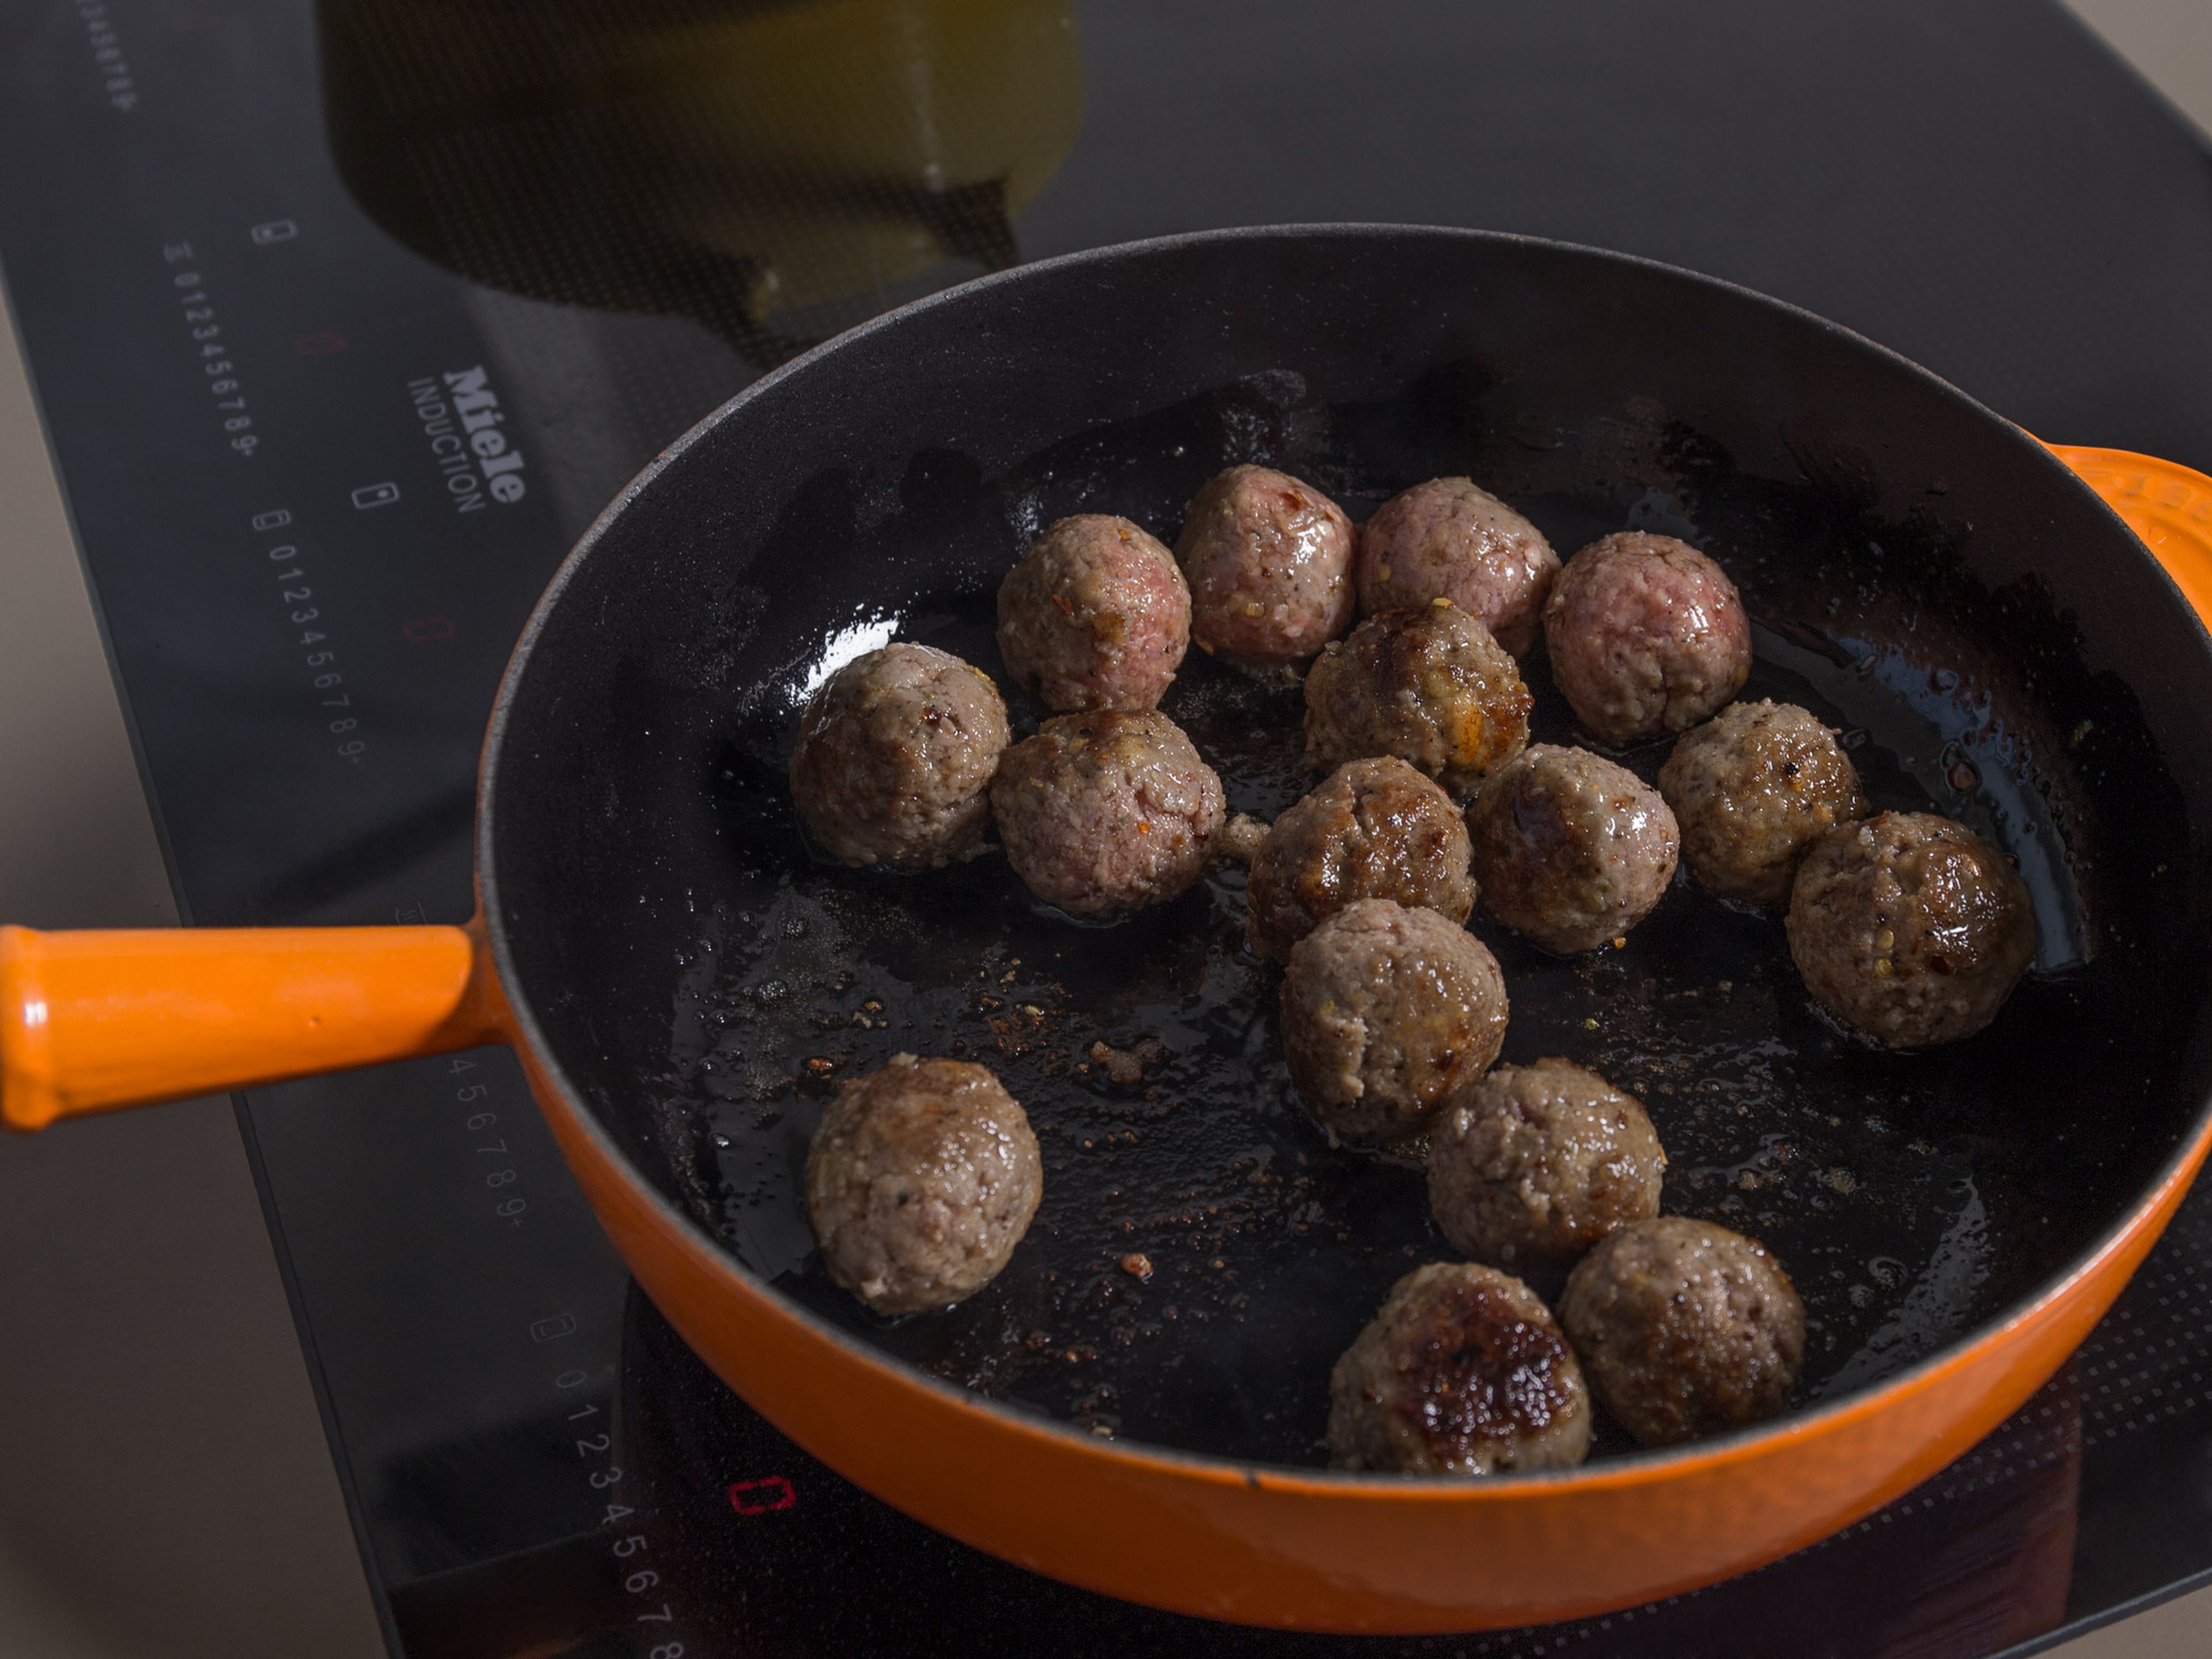 While the meatballs are resting, chop remaining shallots and garlic and sauté in a saucepan with some of the olive oil. Add the crushed tomatoes, season with salt and pepper, and let it simmer. Heat remaining olive oil in the other large frying pan and fry meatballs on all sides for approx. 5 min., or until browned on all sides. Remove from heat and transfer to the tomato sauce. Let simmer for approx. 15 – 20 min.